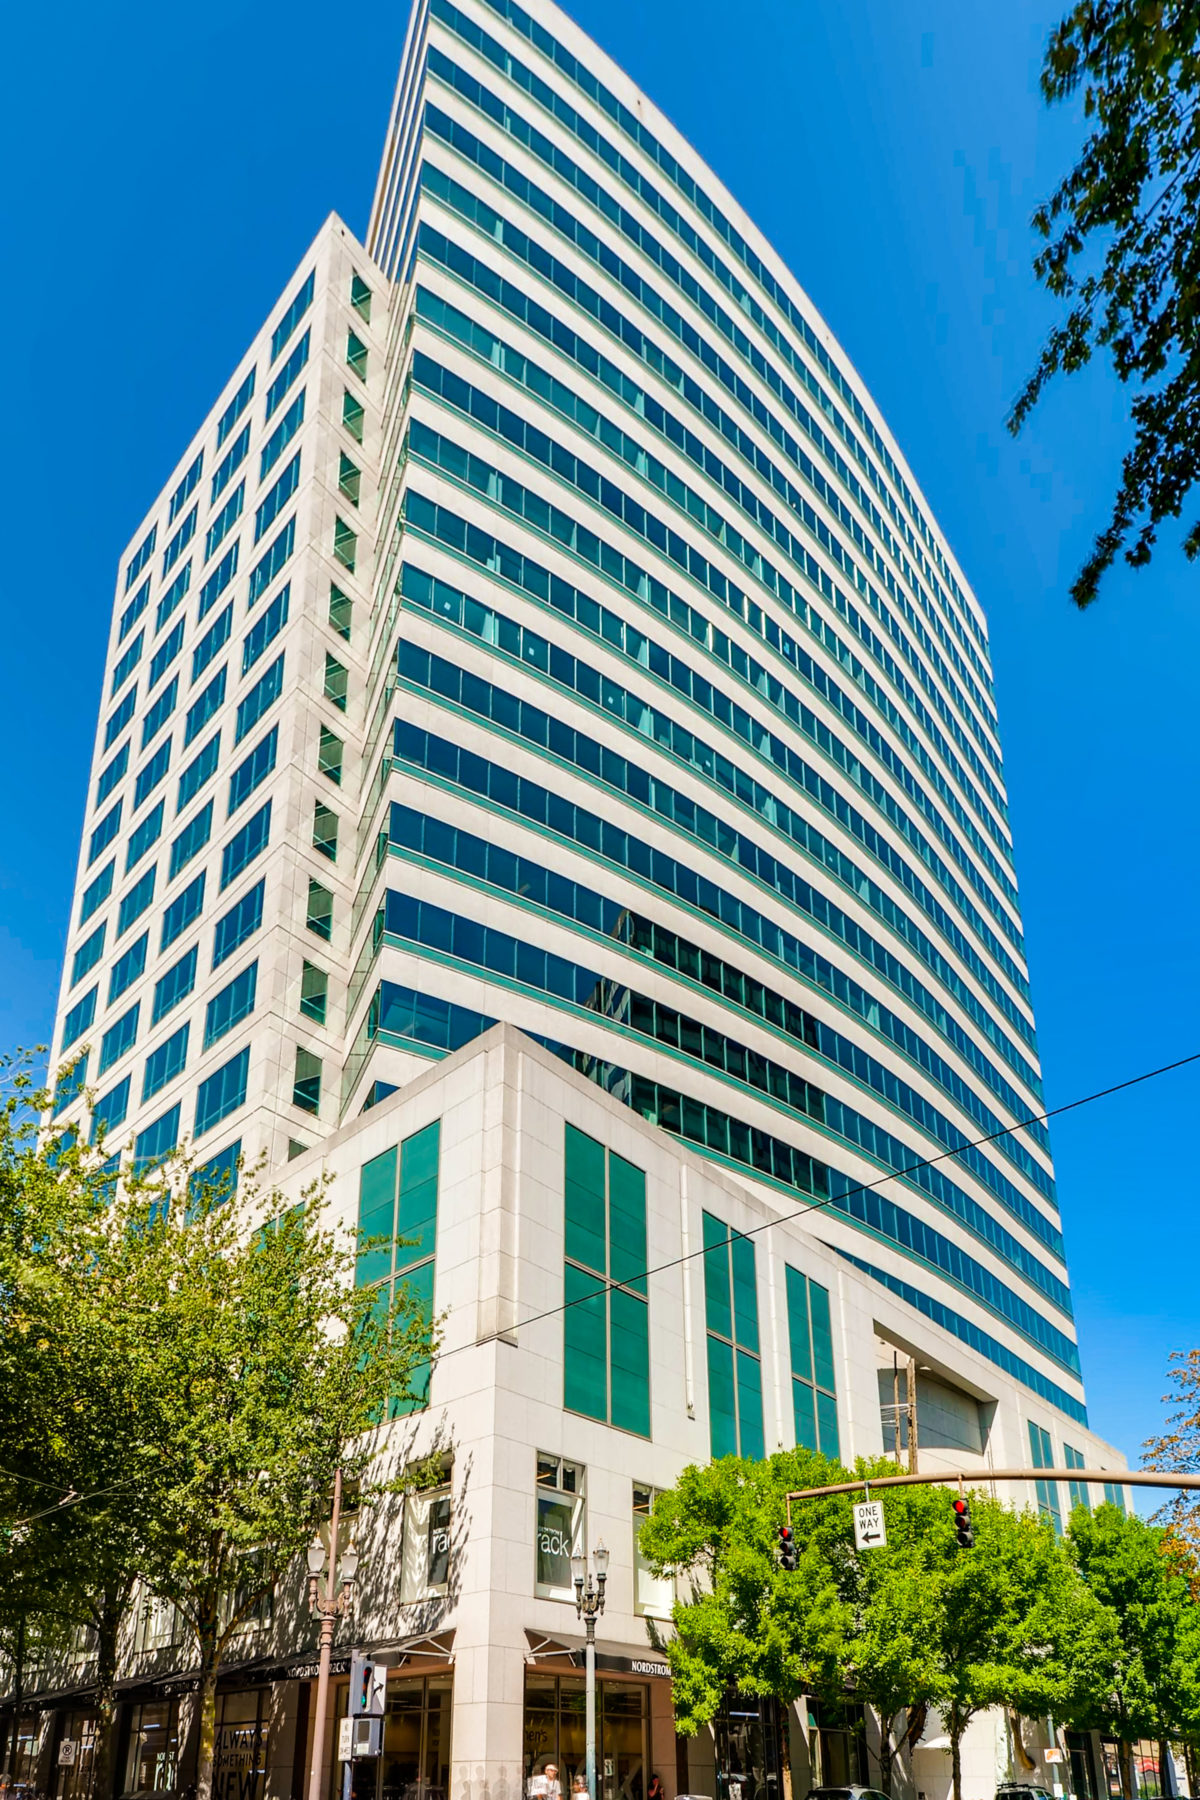 Moda Tower is Unico's latest acquisition in Portland. The 24-story skyline asset is prominently located in Portland's central business district (CBD). In the photograph, the MODA Tower rises above downtown against a cloudless blue sky.